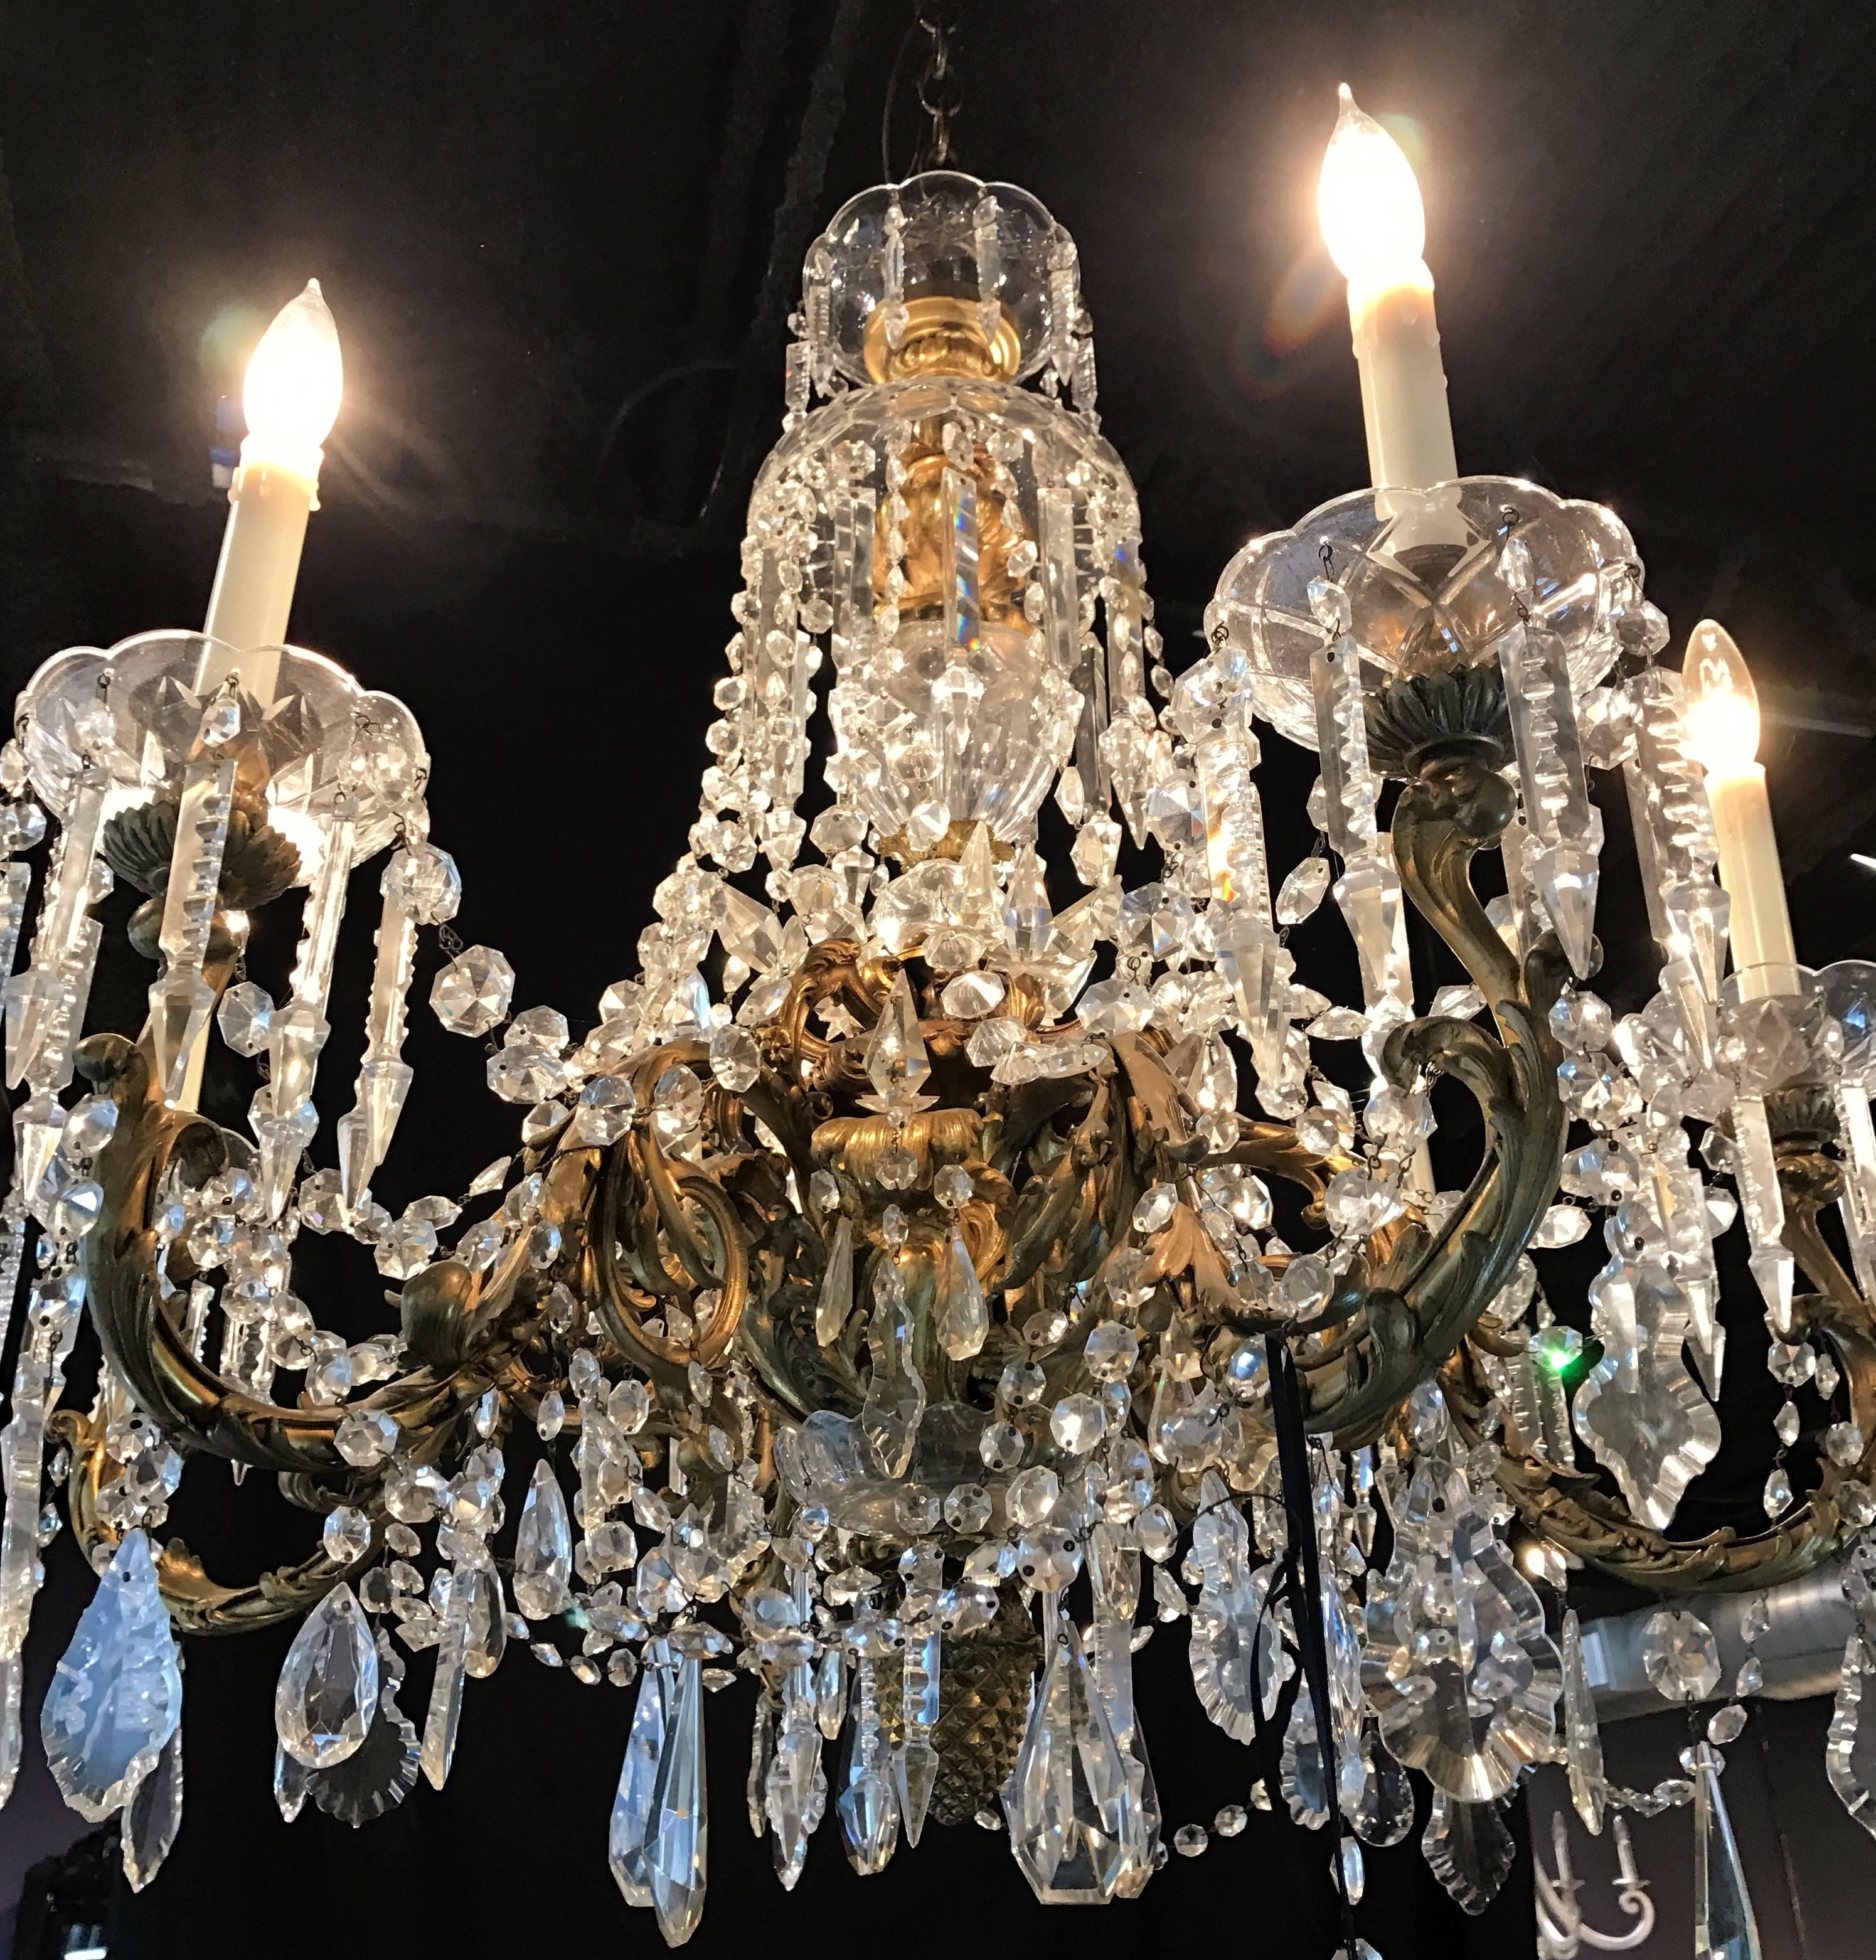 Outstanding 20th century crystal and doré bronze six-light chandelier crafted by Baccarat. The gorgeous waterfall chandelier has a beautiful faceted crystal center and is adorned with hundreds of luminous prisms and crystal beads. An opulent